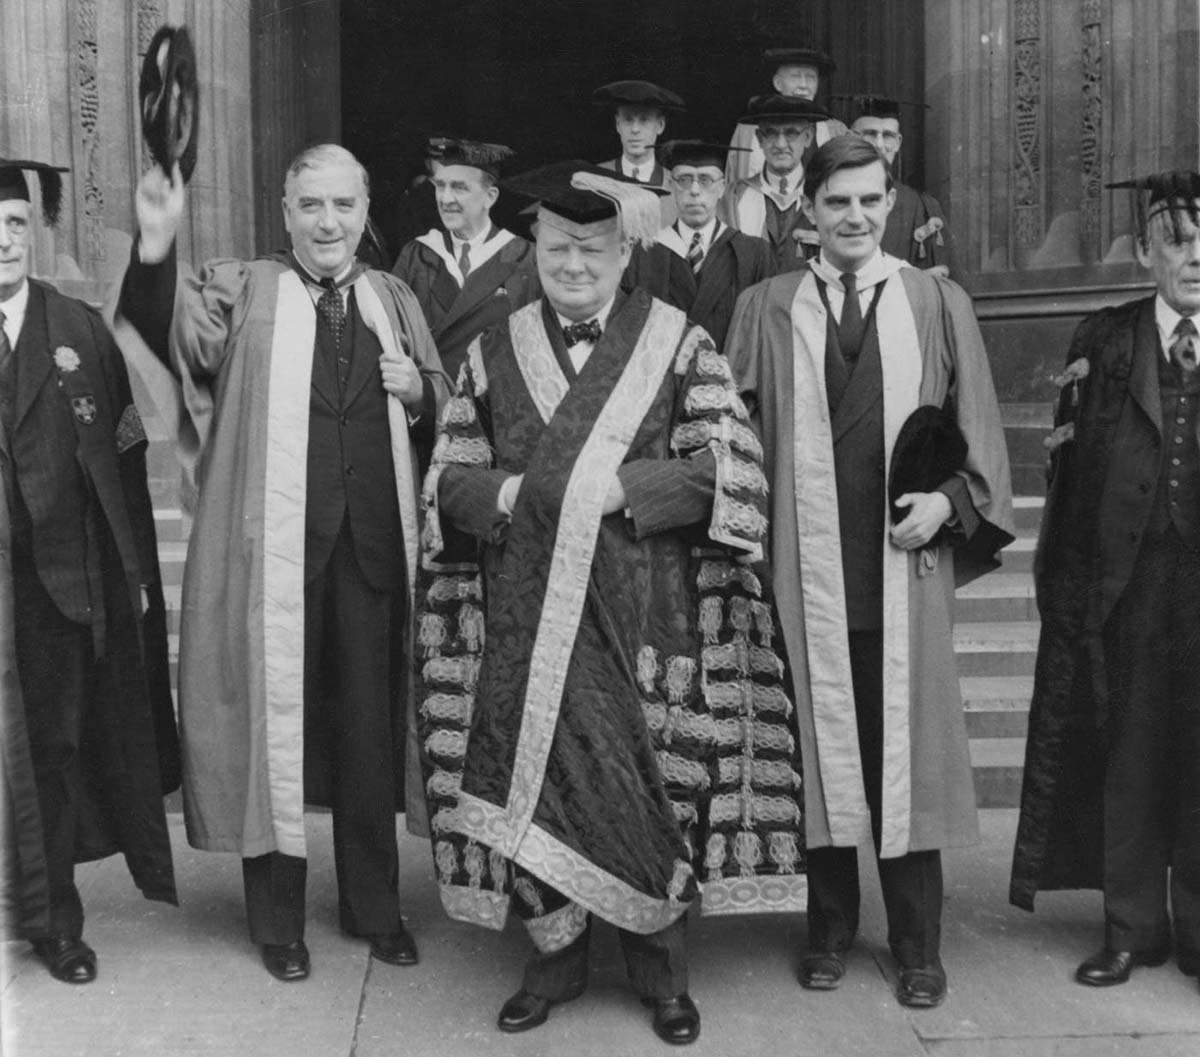 A black and white photo of a group of older men dressed in graduate garb.